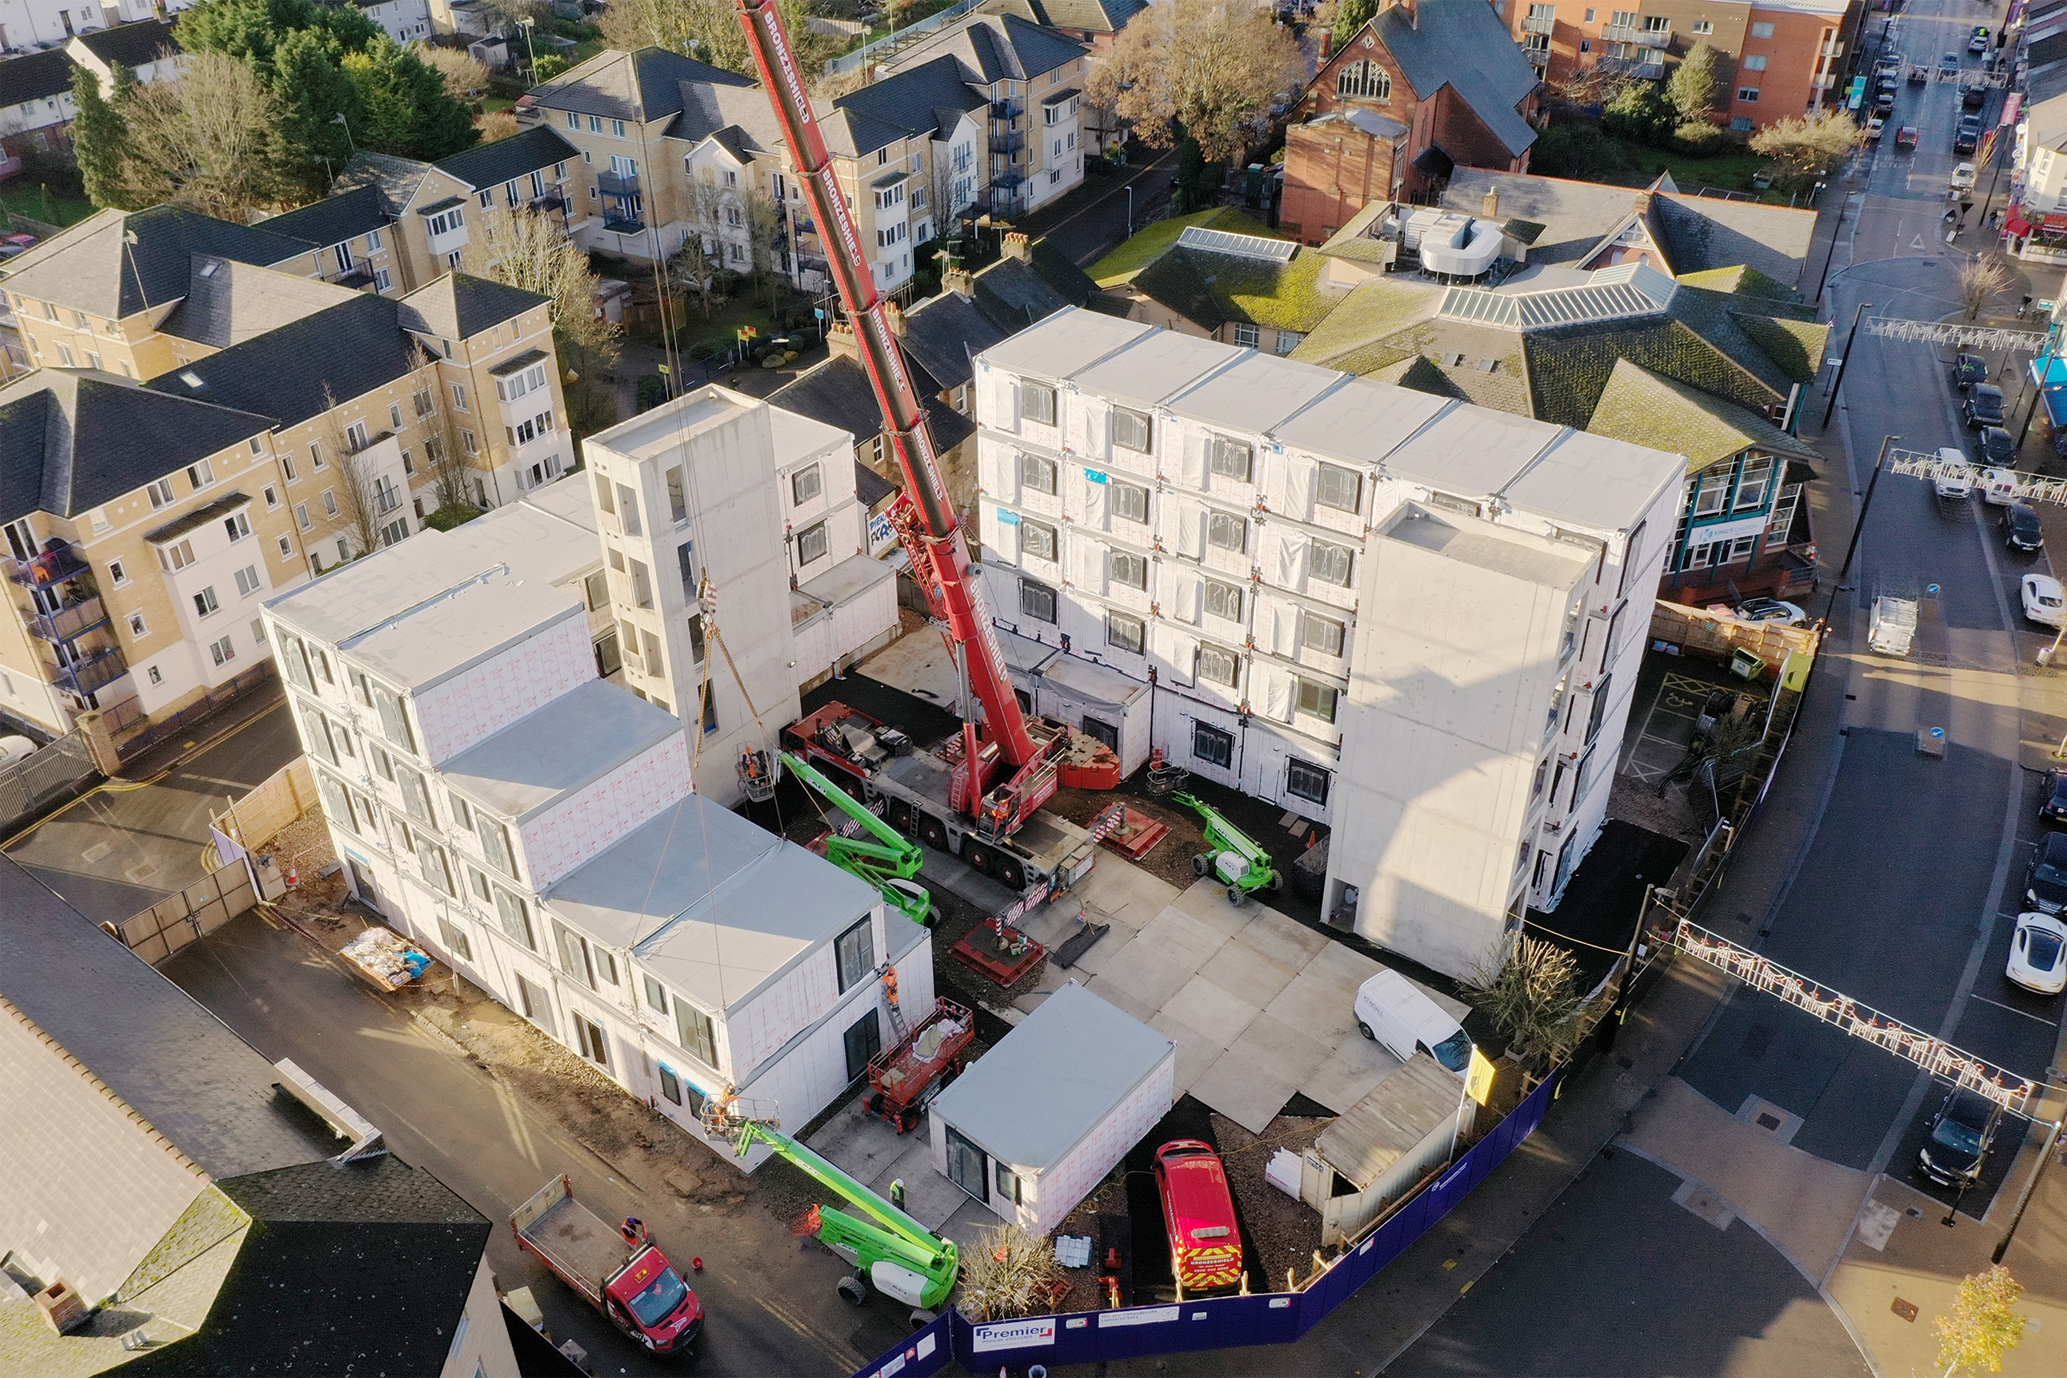 PREMIER MODULAR ACHIEVES BOPAS ACCREDITATION FOR ITS OFFSITE SOLUTIONS FOLLOWING EXPANSION INTO RESIDENTIAL @Premier_Modular